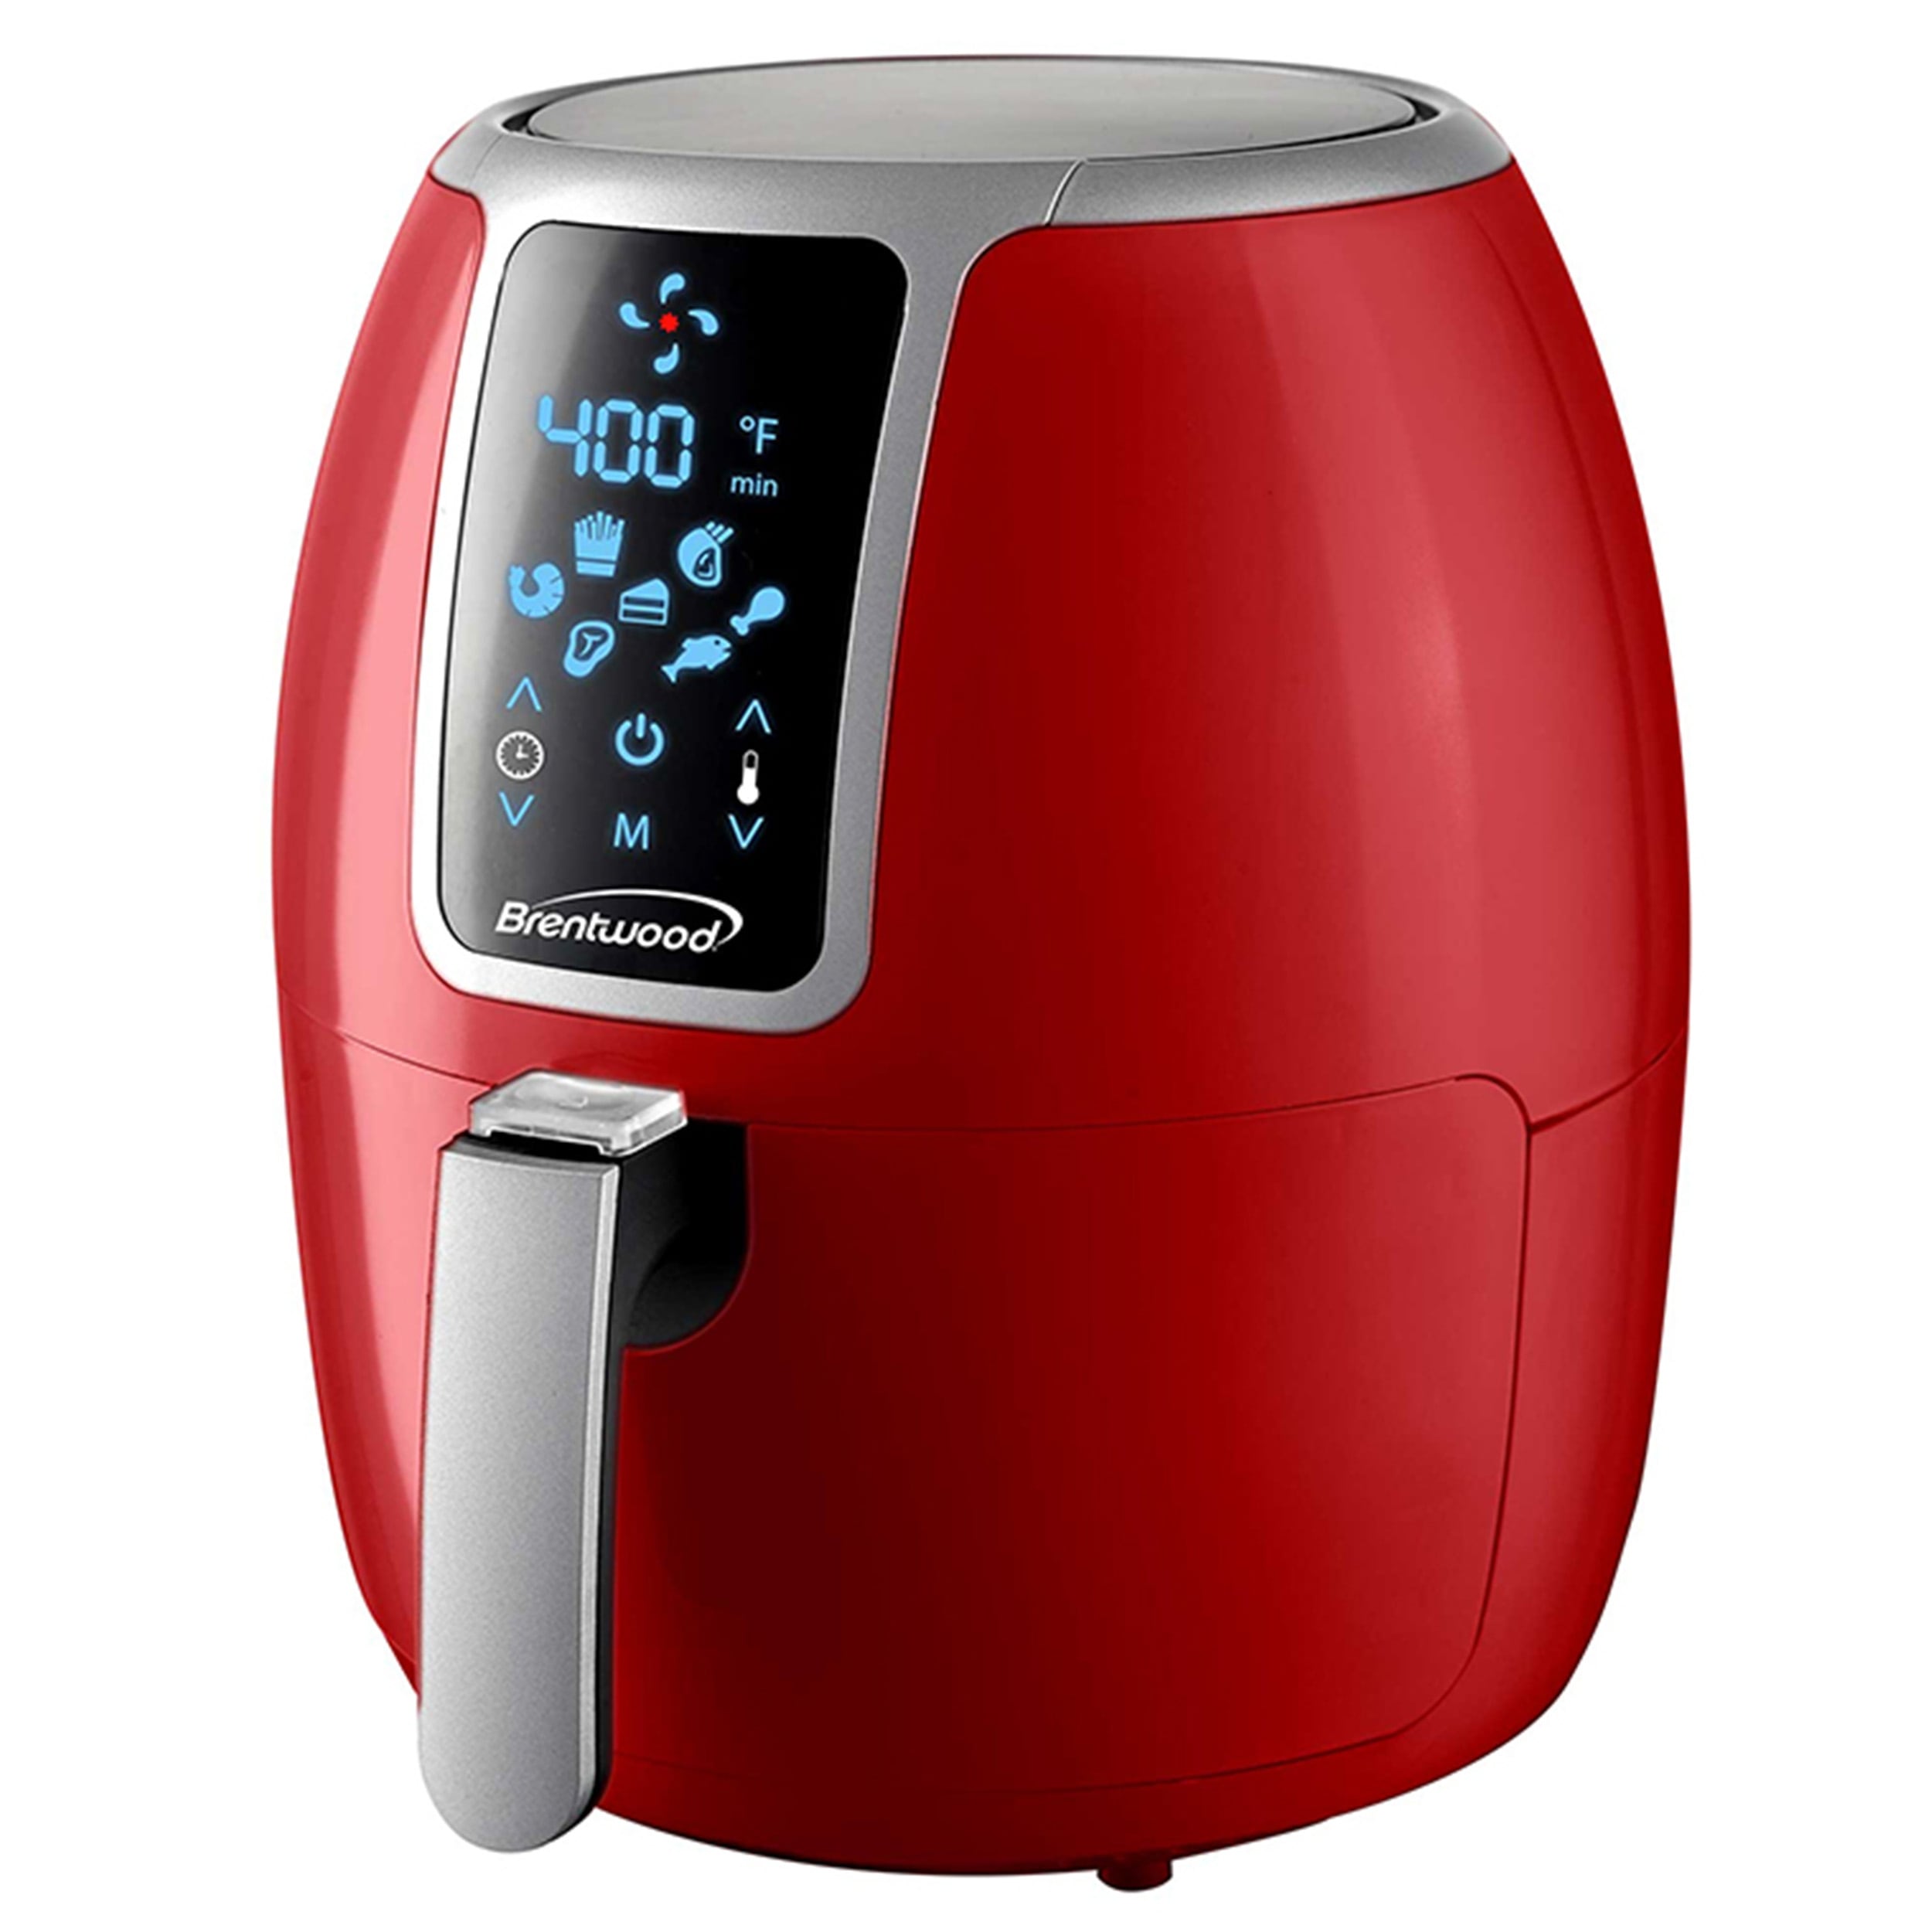 1 Qt Air Fryers by Elite Gourmet, Blue and Red - BRAND NEW